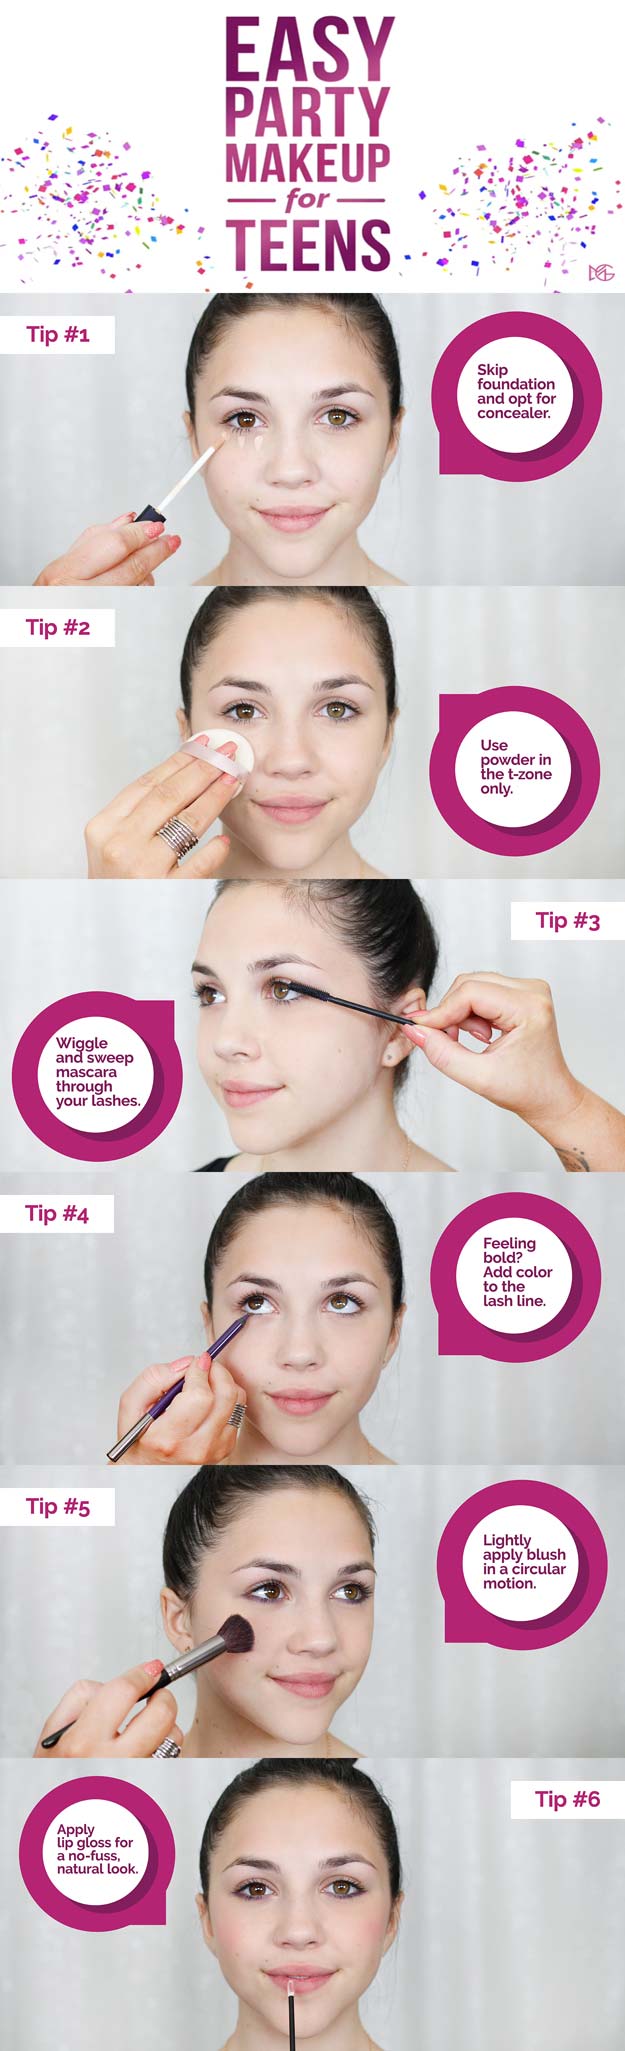 Best Makeup Tutorials for Teens -Easy Makeup Artist for Teens - Easy Makeup Ideas for Beginners - Step by Step Tutorials for Foundation, Eye Shadow, Lipstick, Cheeks, Contour, Eyebrows and Eyes - Awesome Makeup Hacks and Tips for Simple DIY Beauty - Day and Evening Looks http://diyprojectsforteens.com/makeup-tutorials-teens 